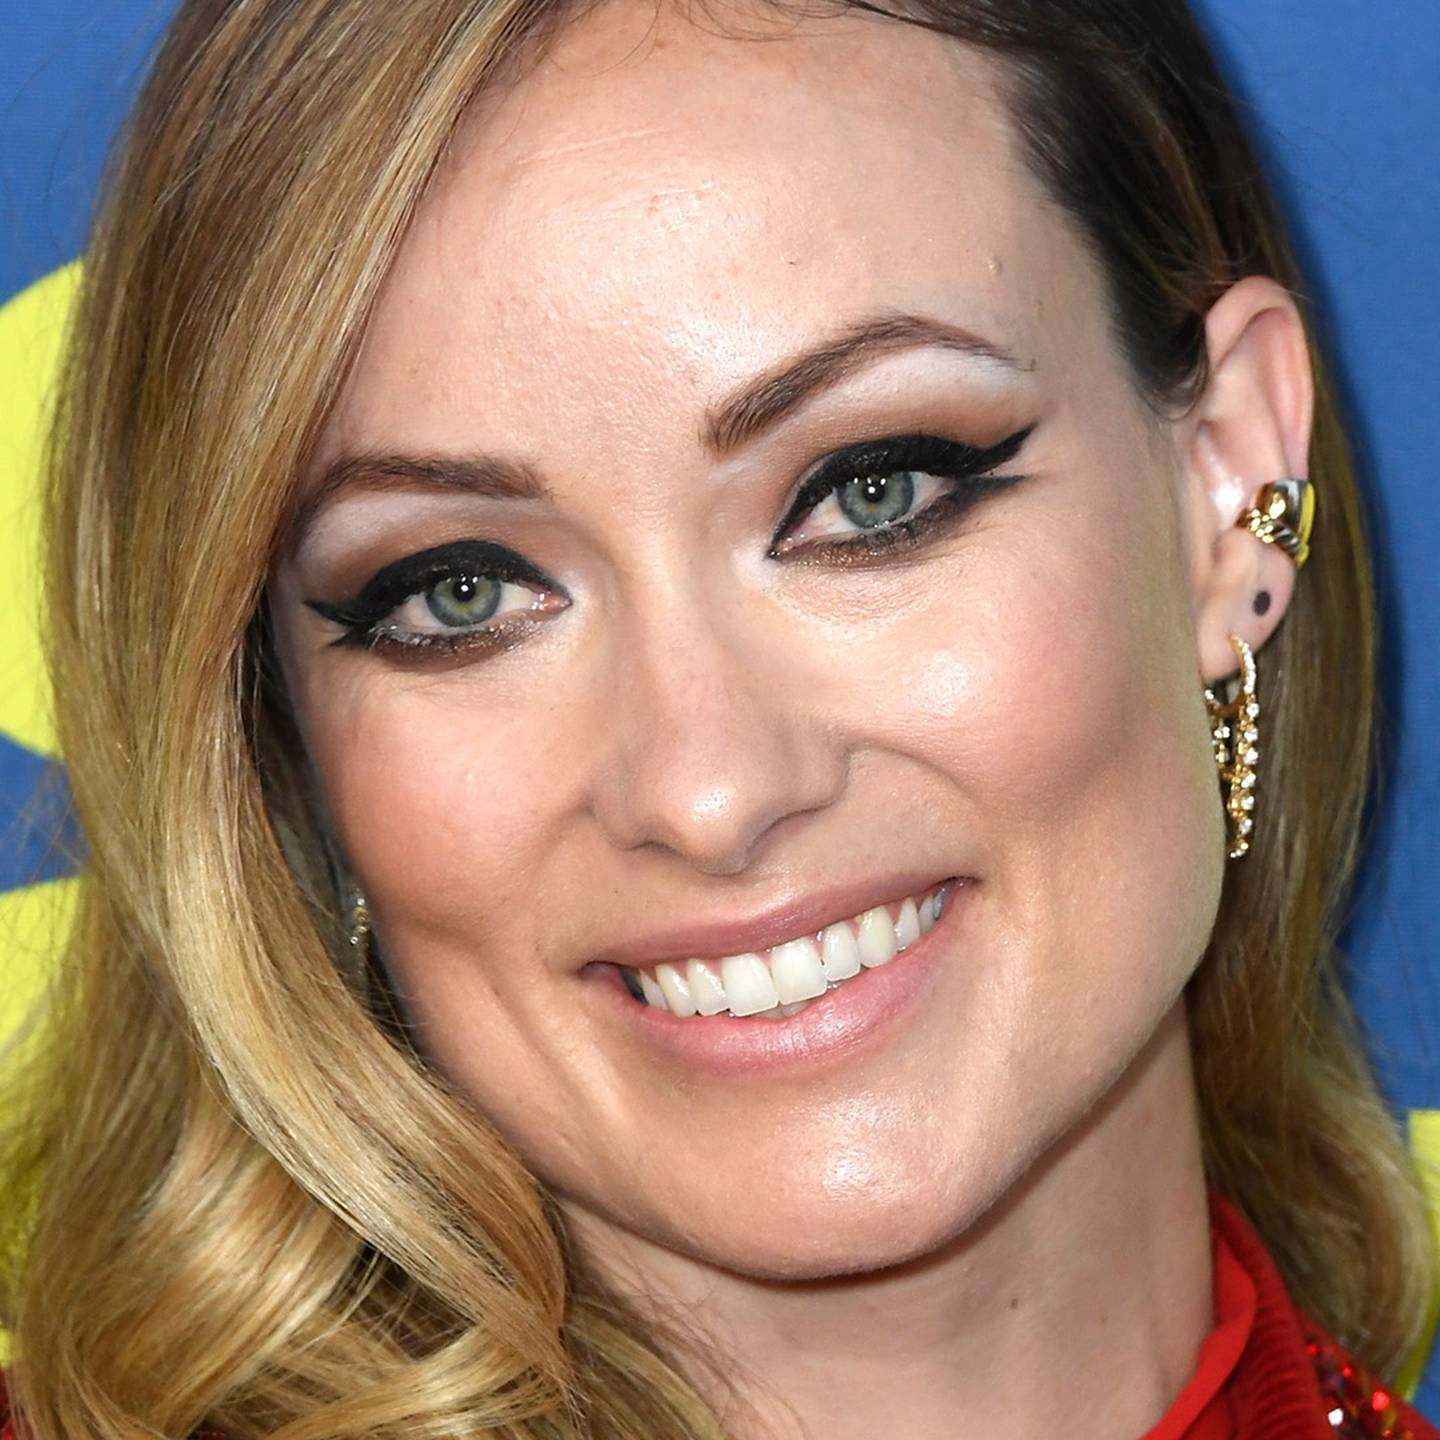 Olivia Wilde kept it sultry with a smudged double line eye liner look. Getty Images